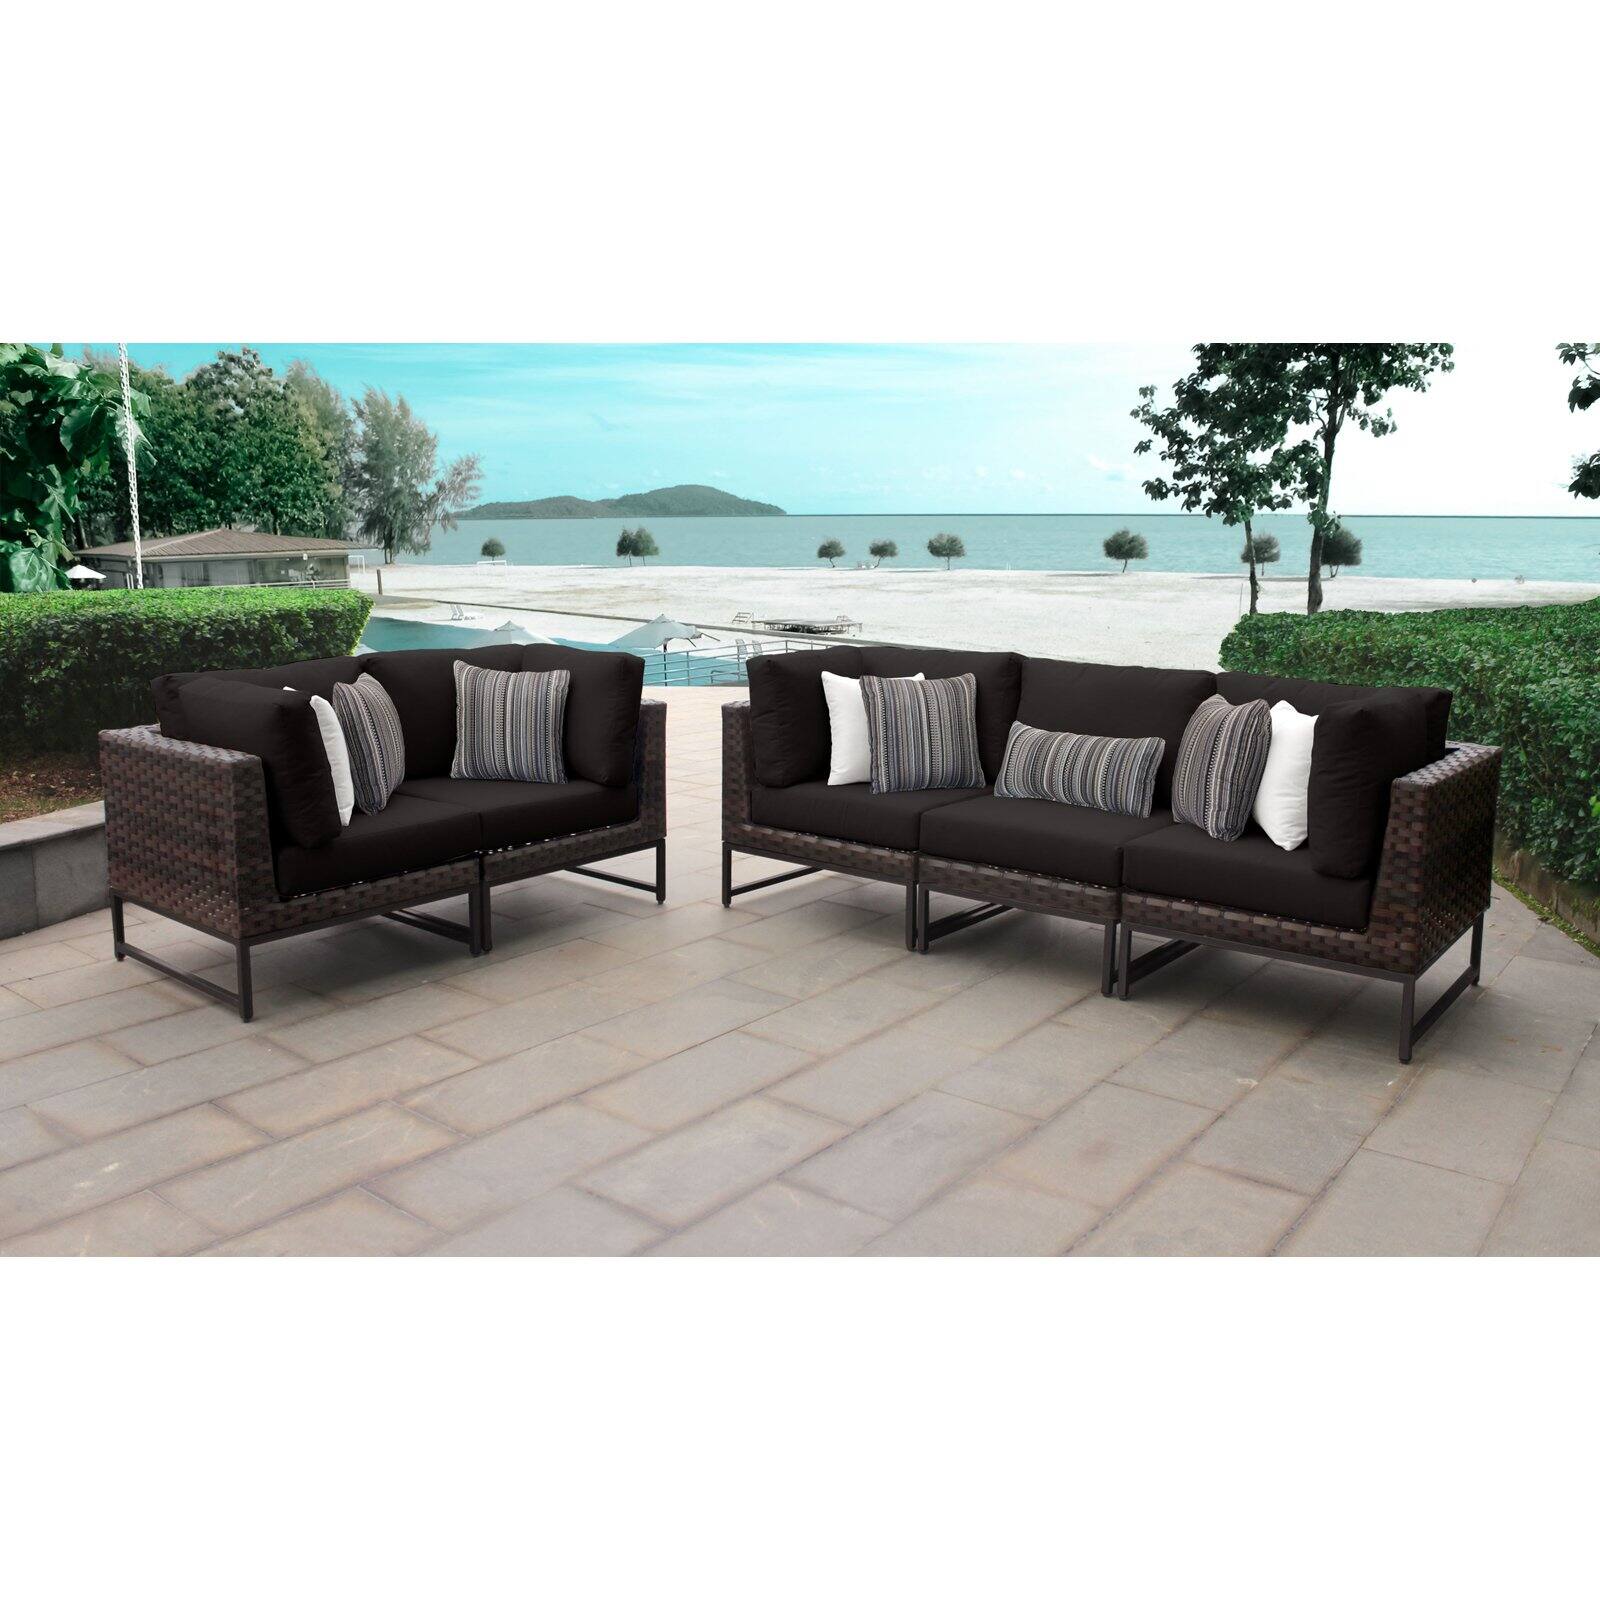 AMALFI 5 Piece Wicker Patio Furniture Set 05a in Gold and Cilantro - image 4 of 11